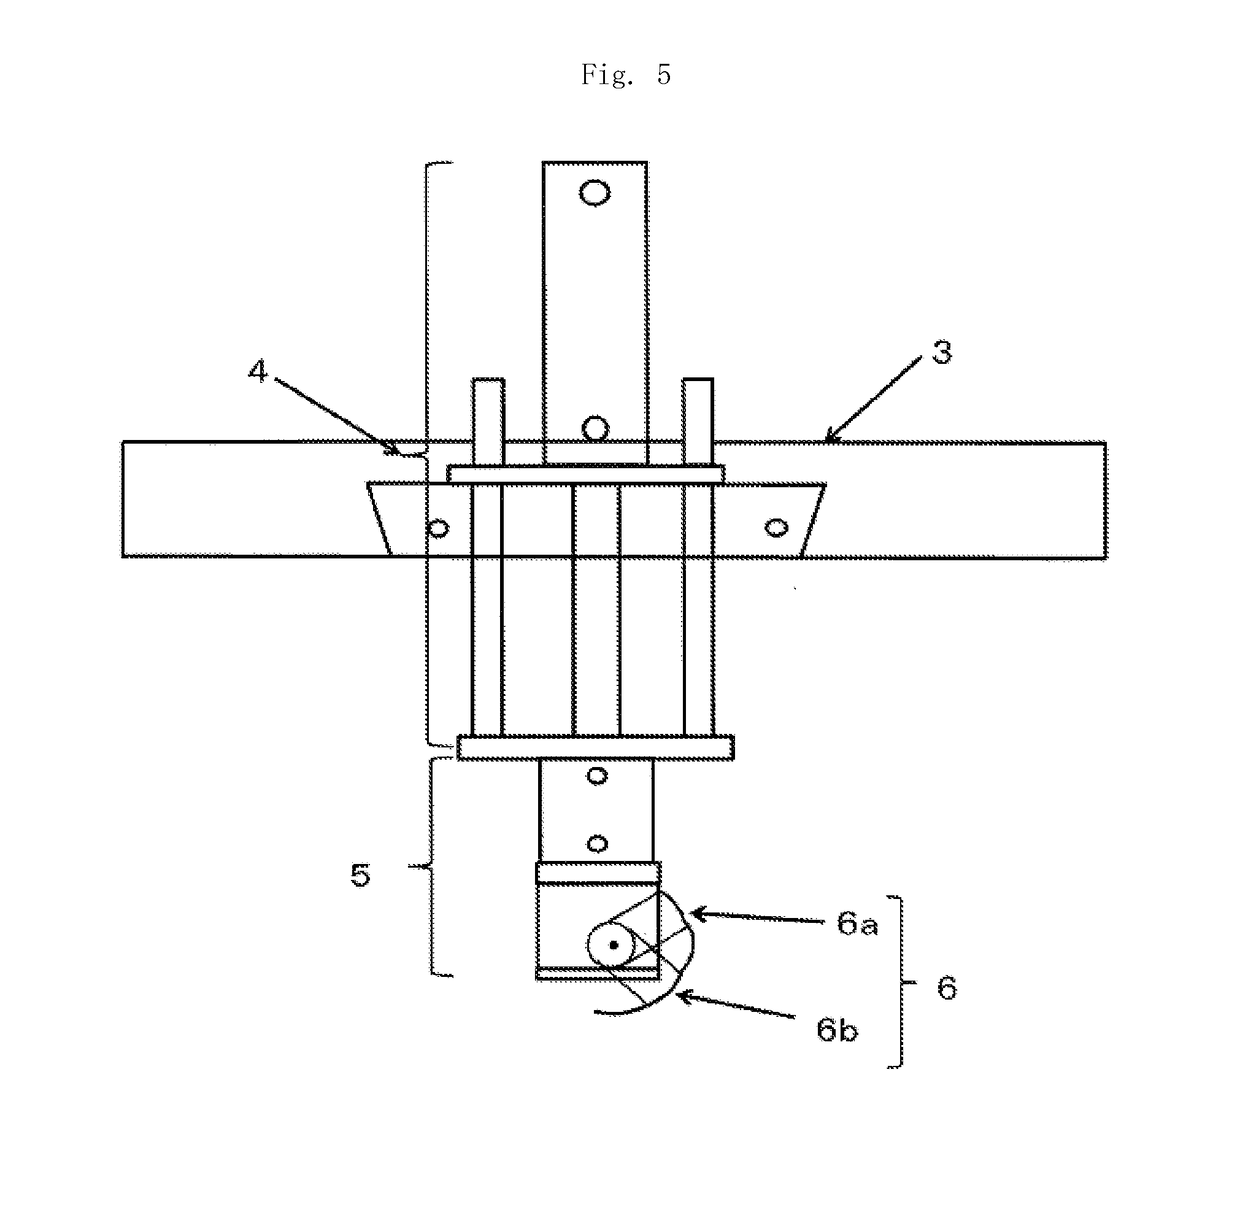 Method of manufacturing a press molding